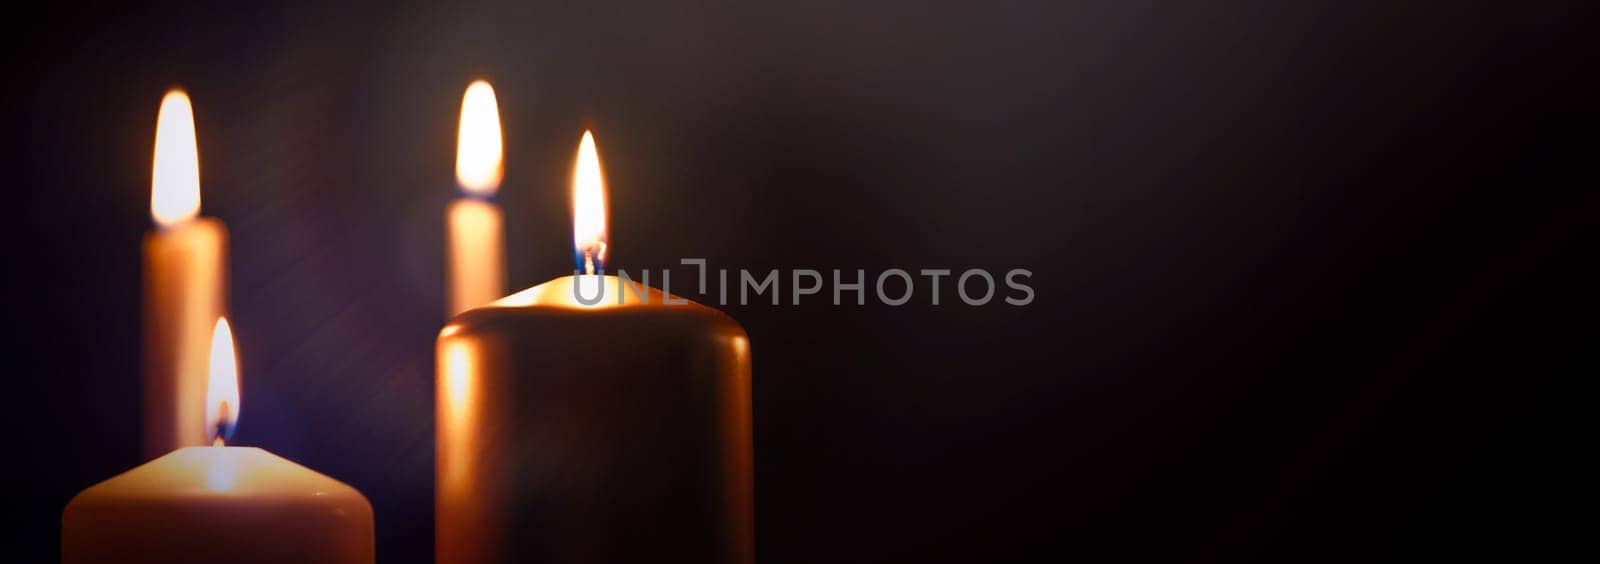 Funeral symbol with burning candle in darkness by simpson33